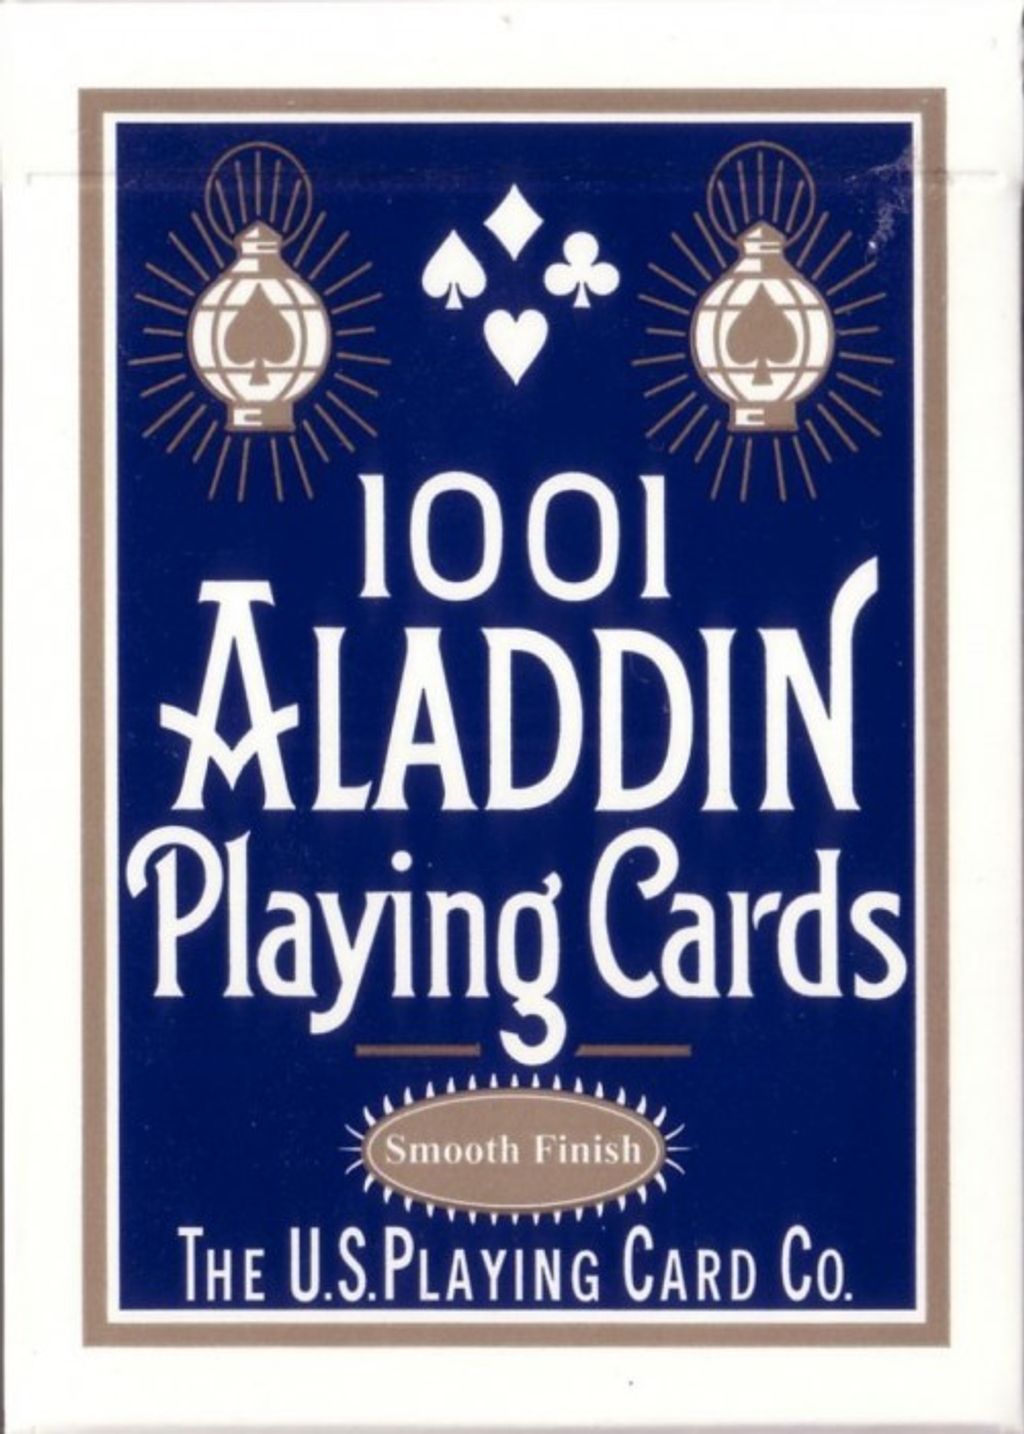 Aladdin New Uncancelled Casino Playing Cards - Blue